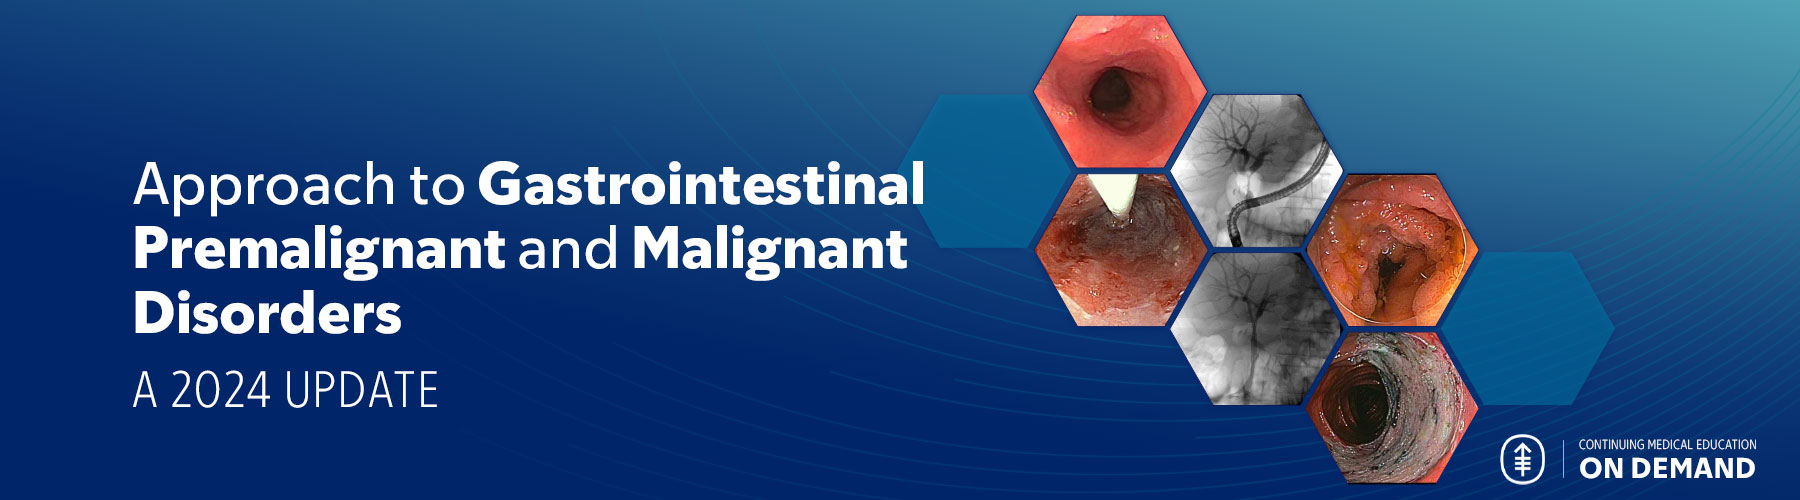 Approach to Gastrointestinal Premalignant and Malignant Disorders: A 2024 Update - On Demand Banner